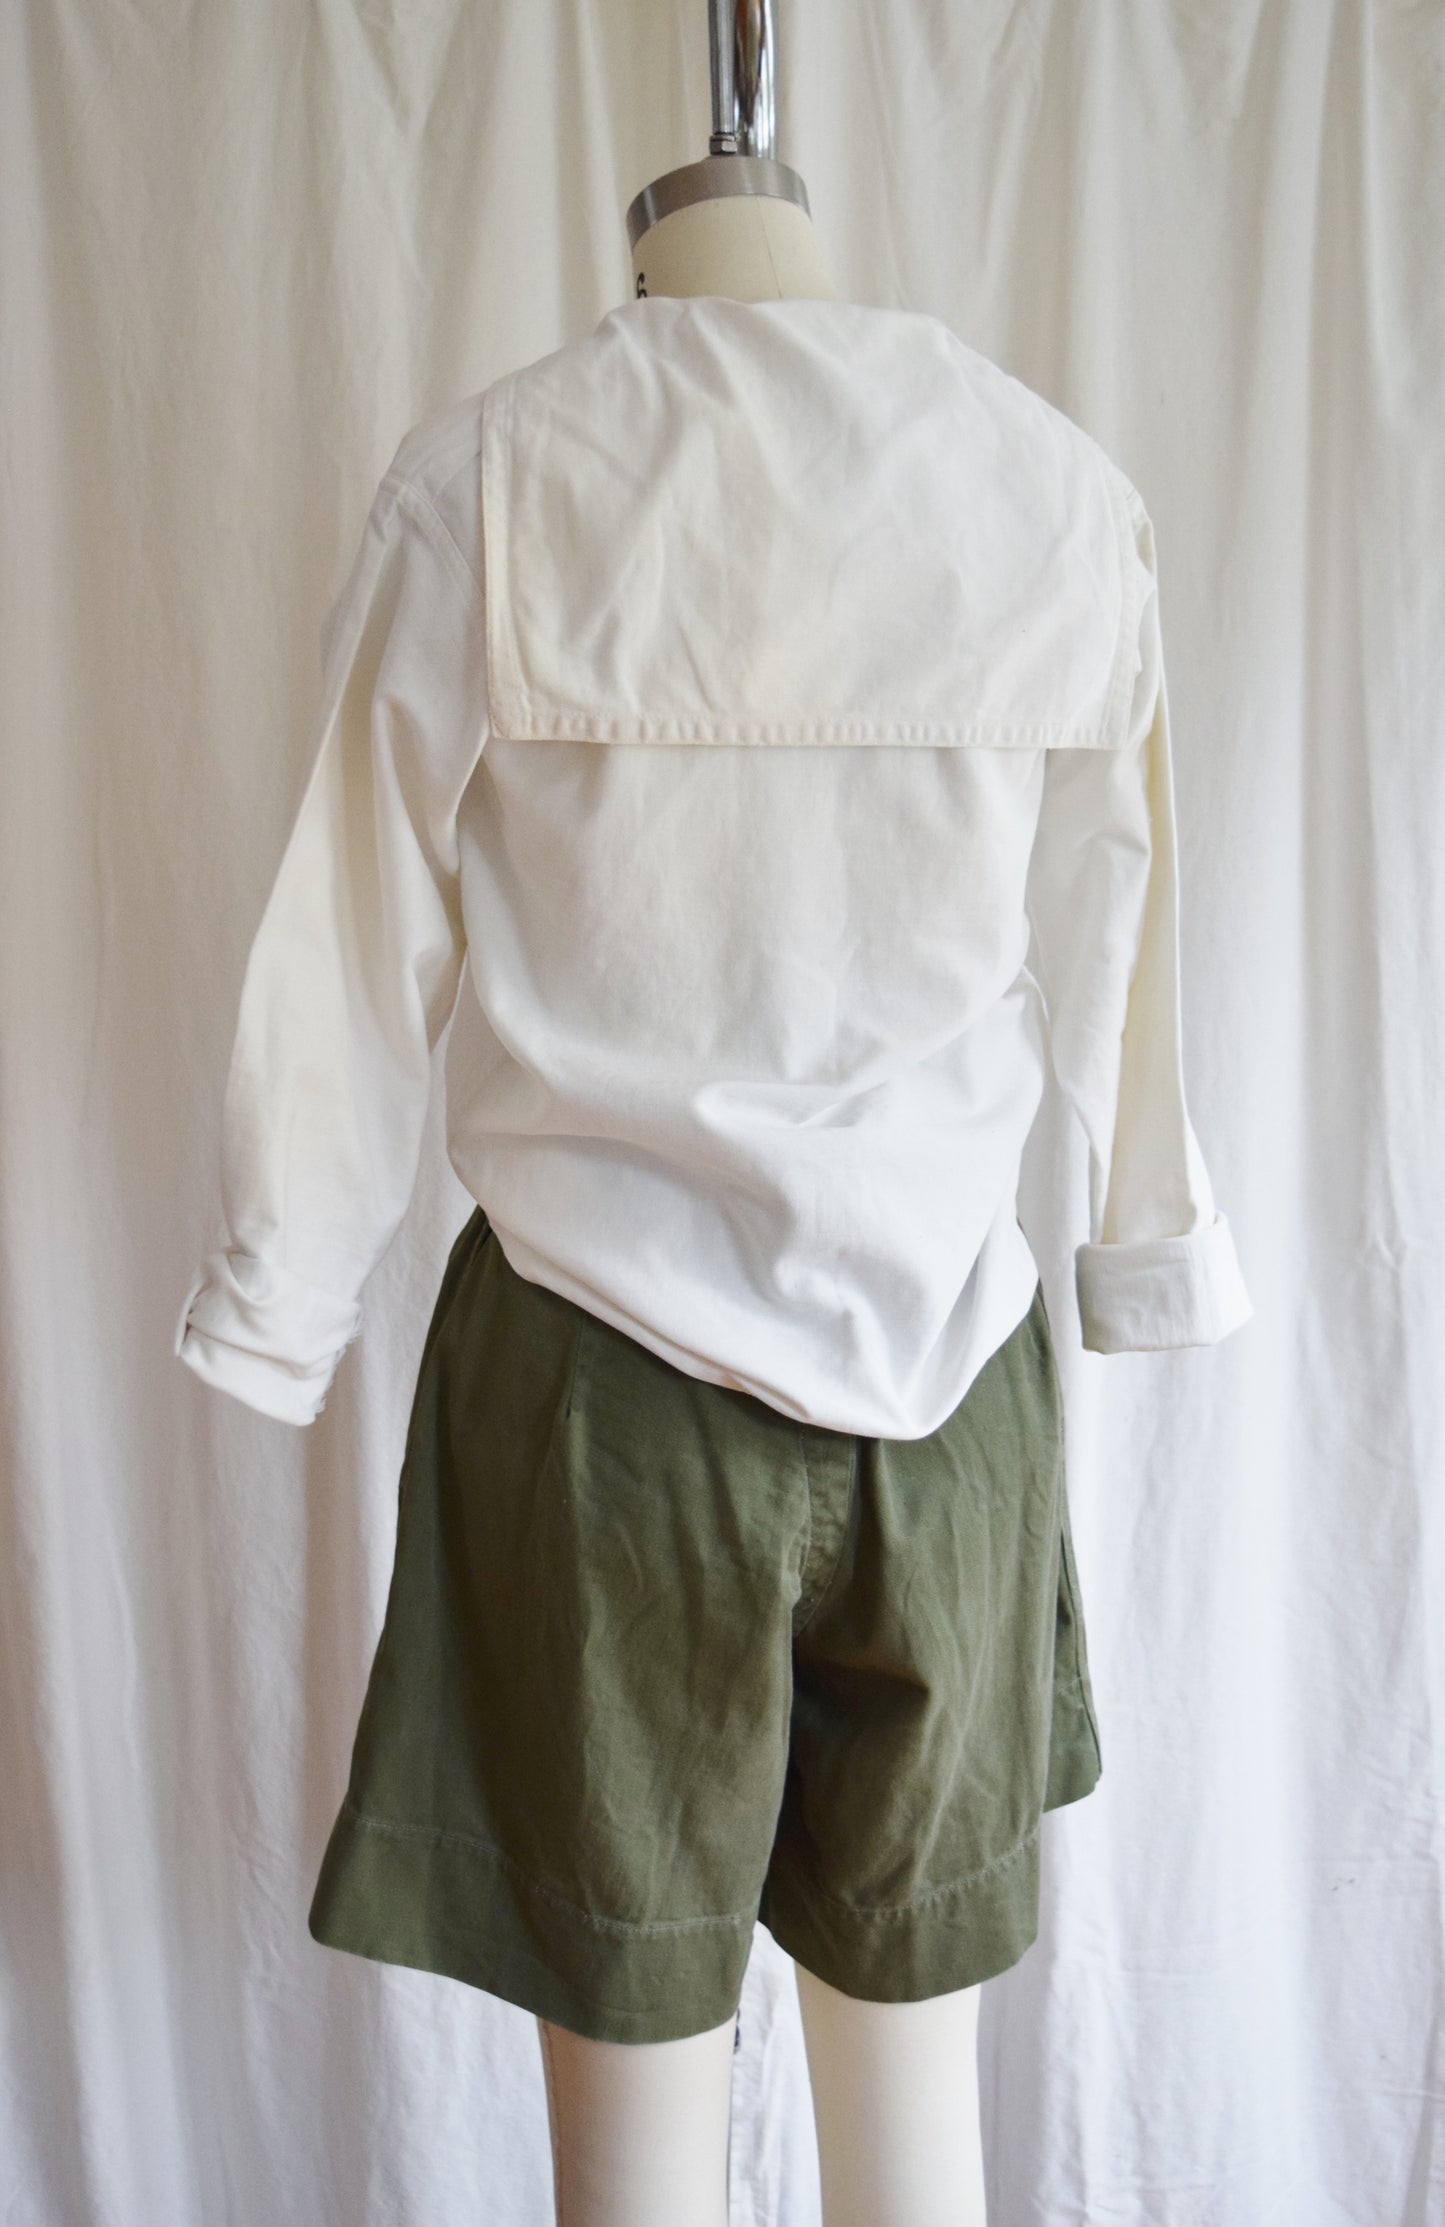 Early 20th Century Navy-Issue White Canvas Shirt